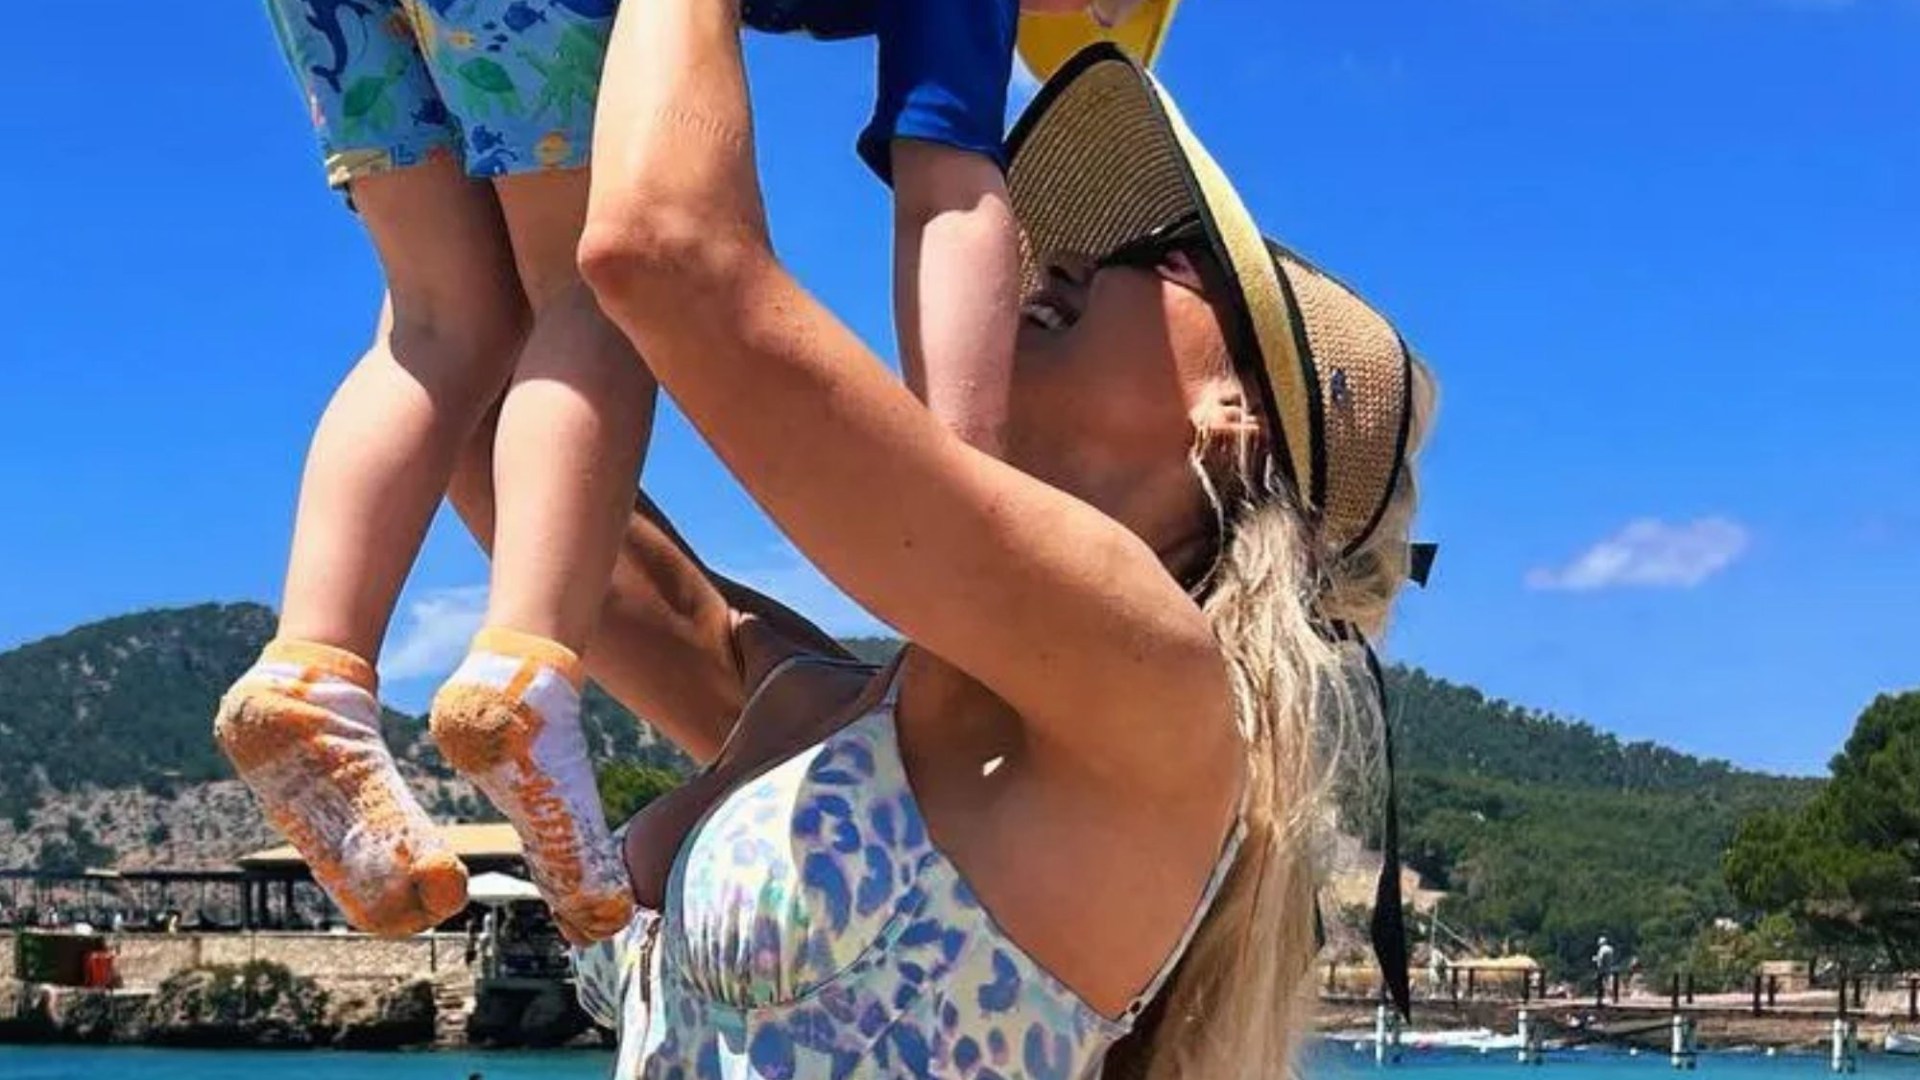 Rosanna Davison shares ‘reality’ of beach day with family as fans joke she’ll have ‘kid shaped tan lines’ [Video]